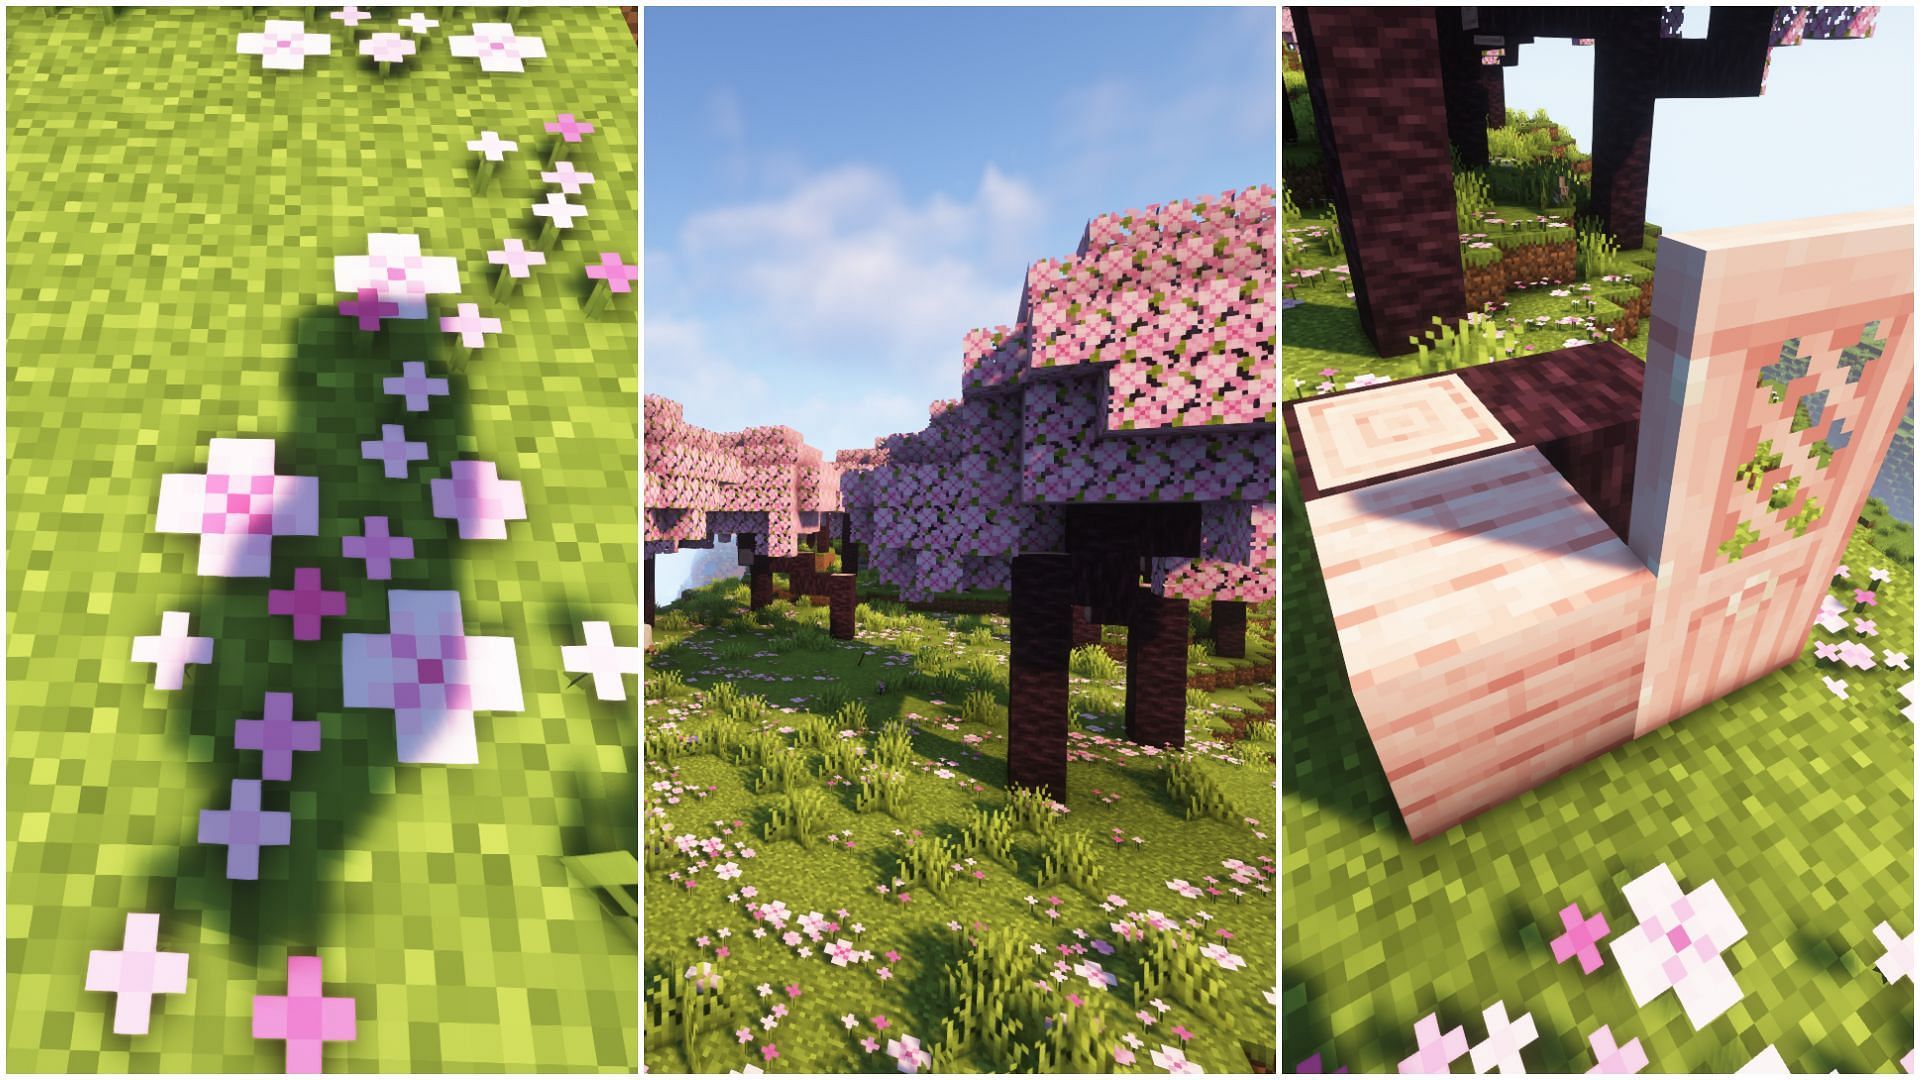 Minecraft cherry blossom update Everything you need to know